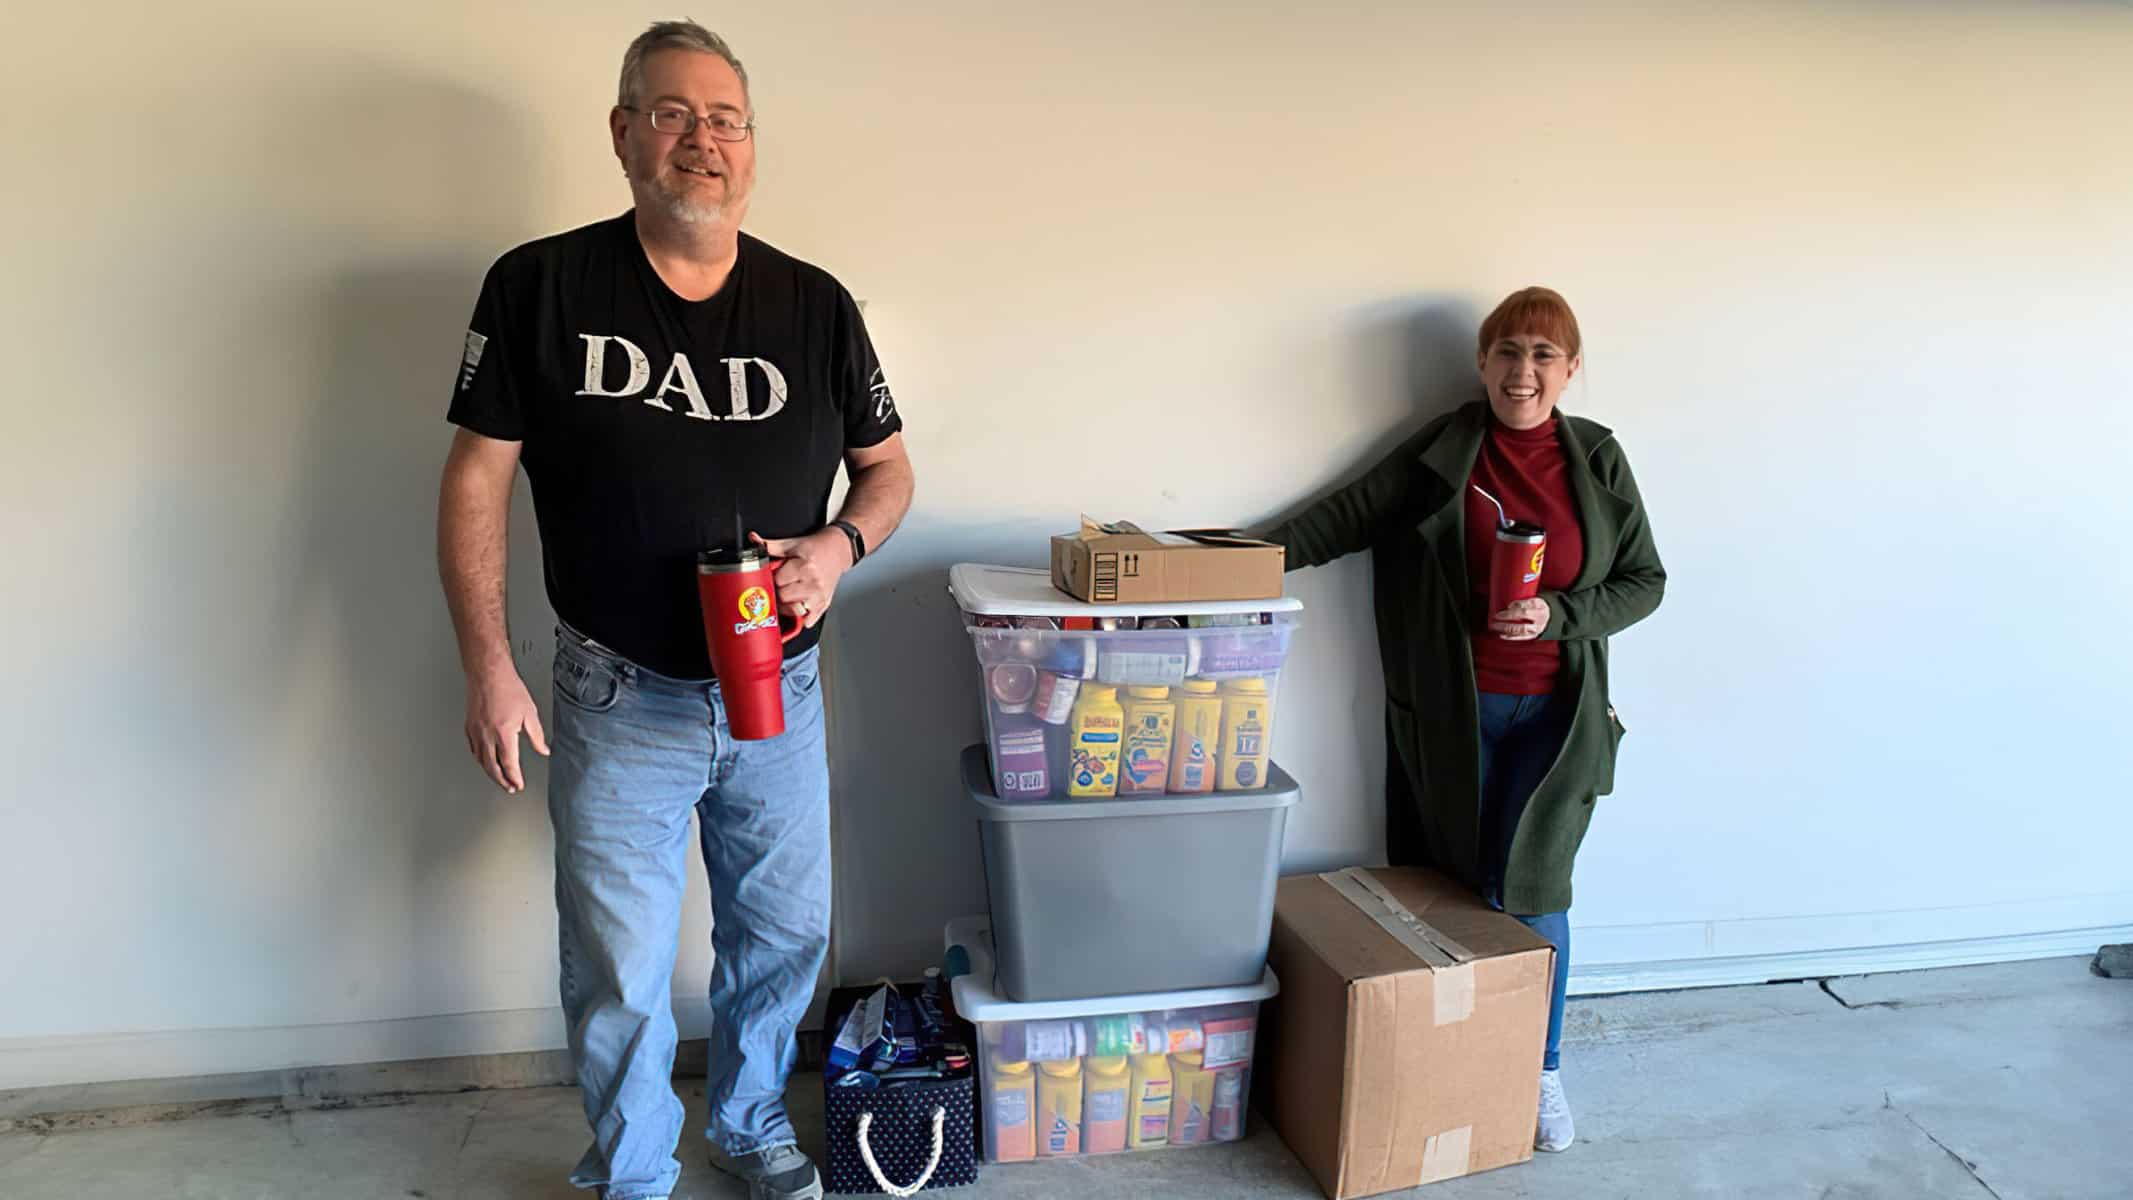 Dale and Cindee Dupaquier standing proudly in a garage next to a large storage bin and boxes filled with vitamin bottles for children in need.